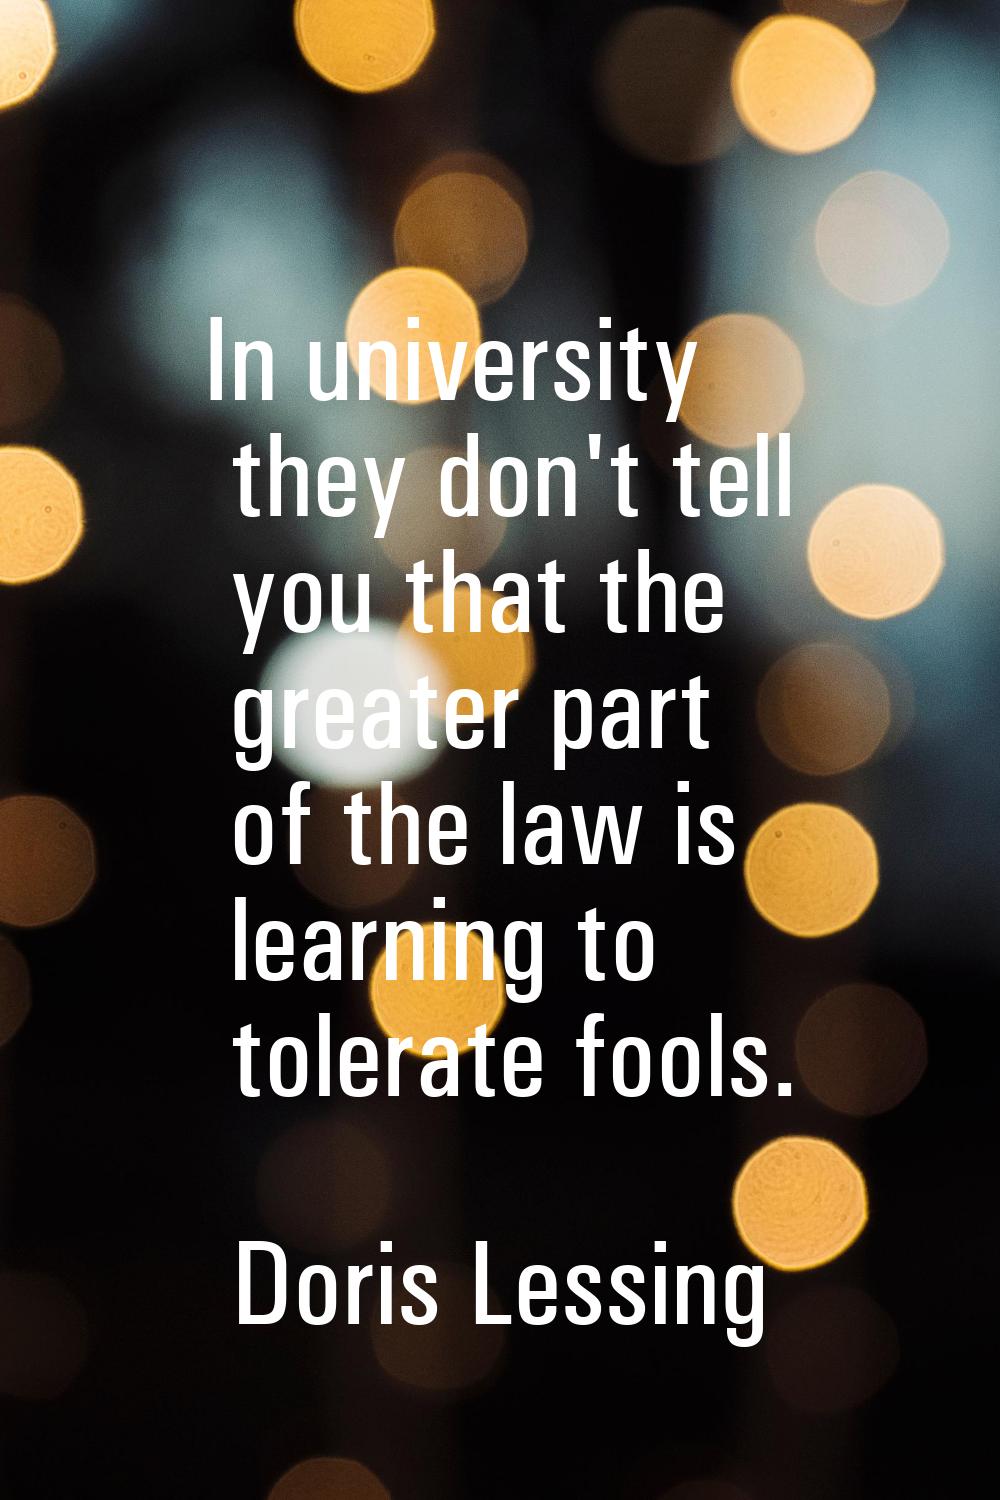 In university they don't tell you that the greater part of the law is learning to tolerate fools.